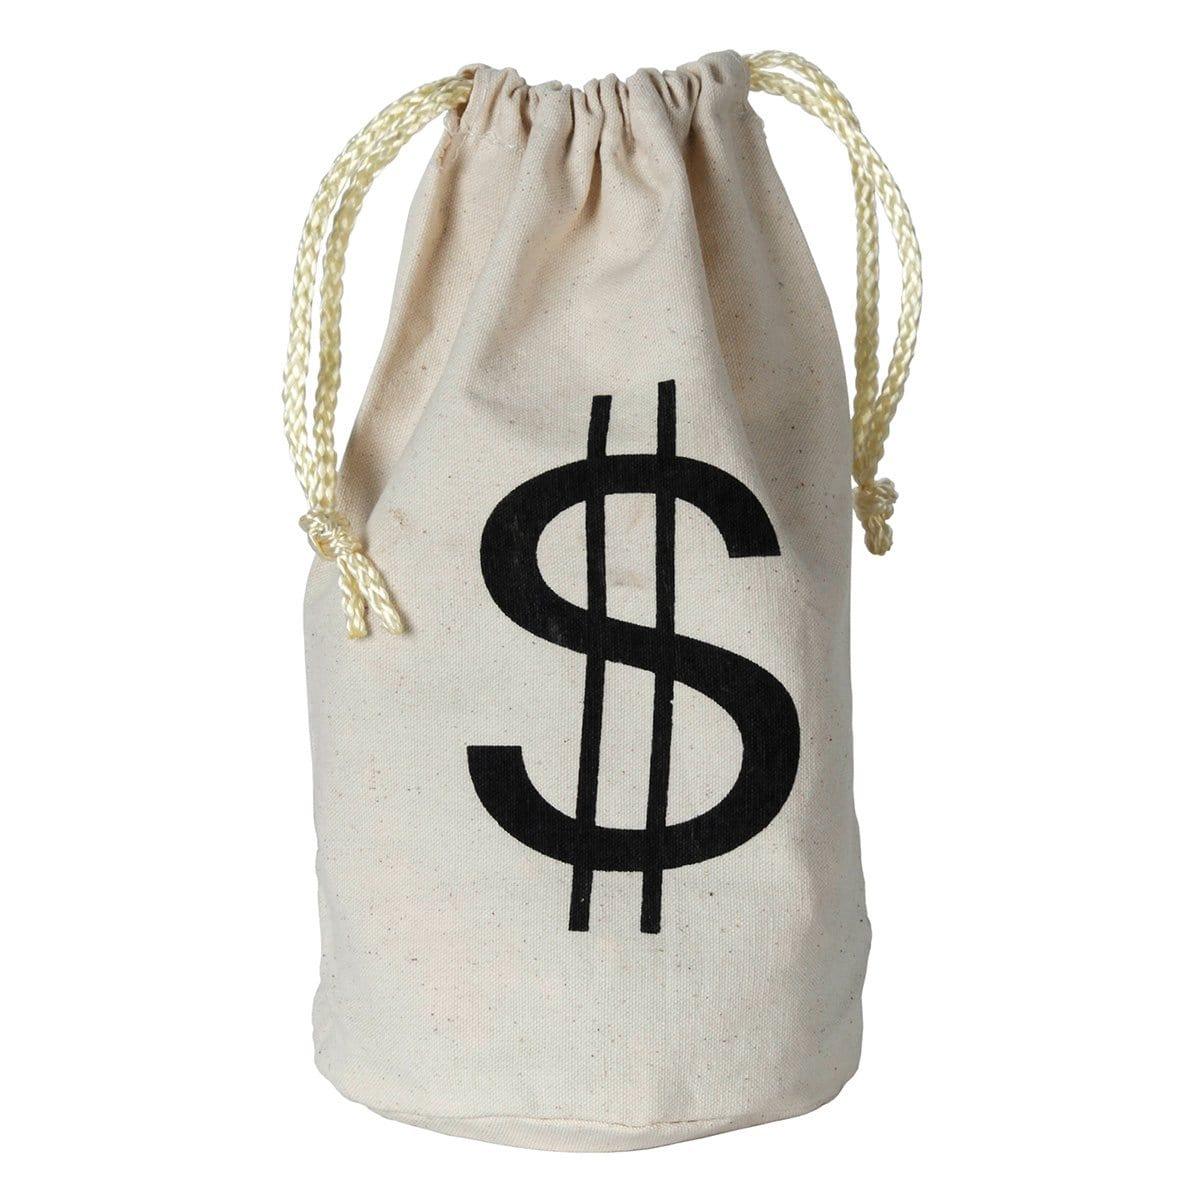 Buy Theme Party Money Bag sold at Party Expert